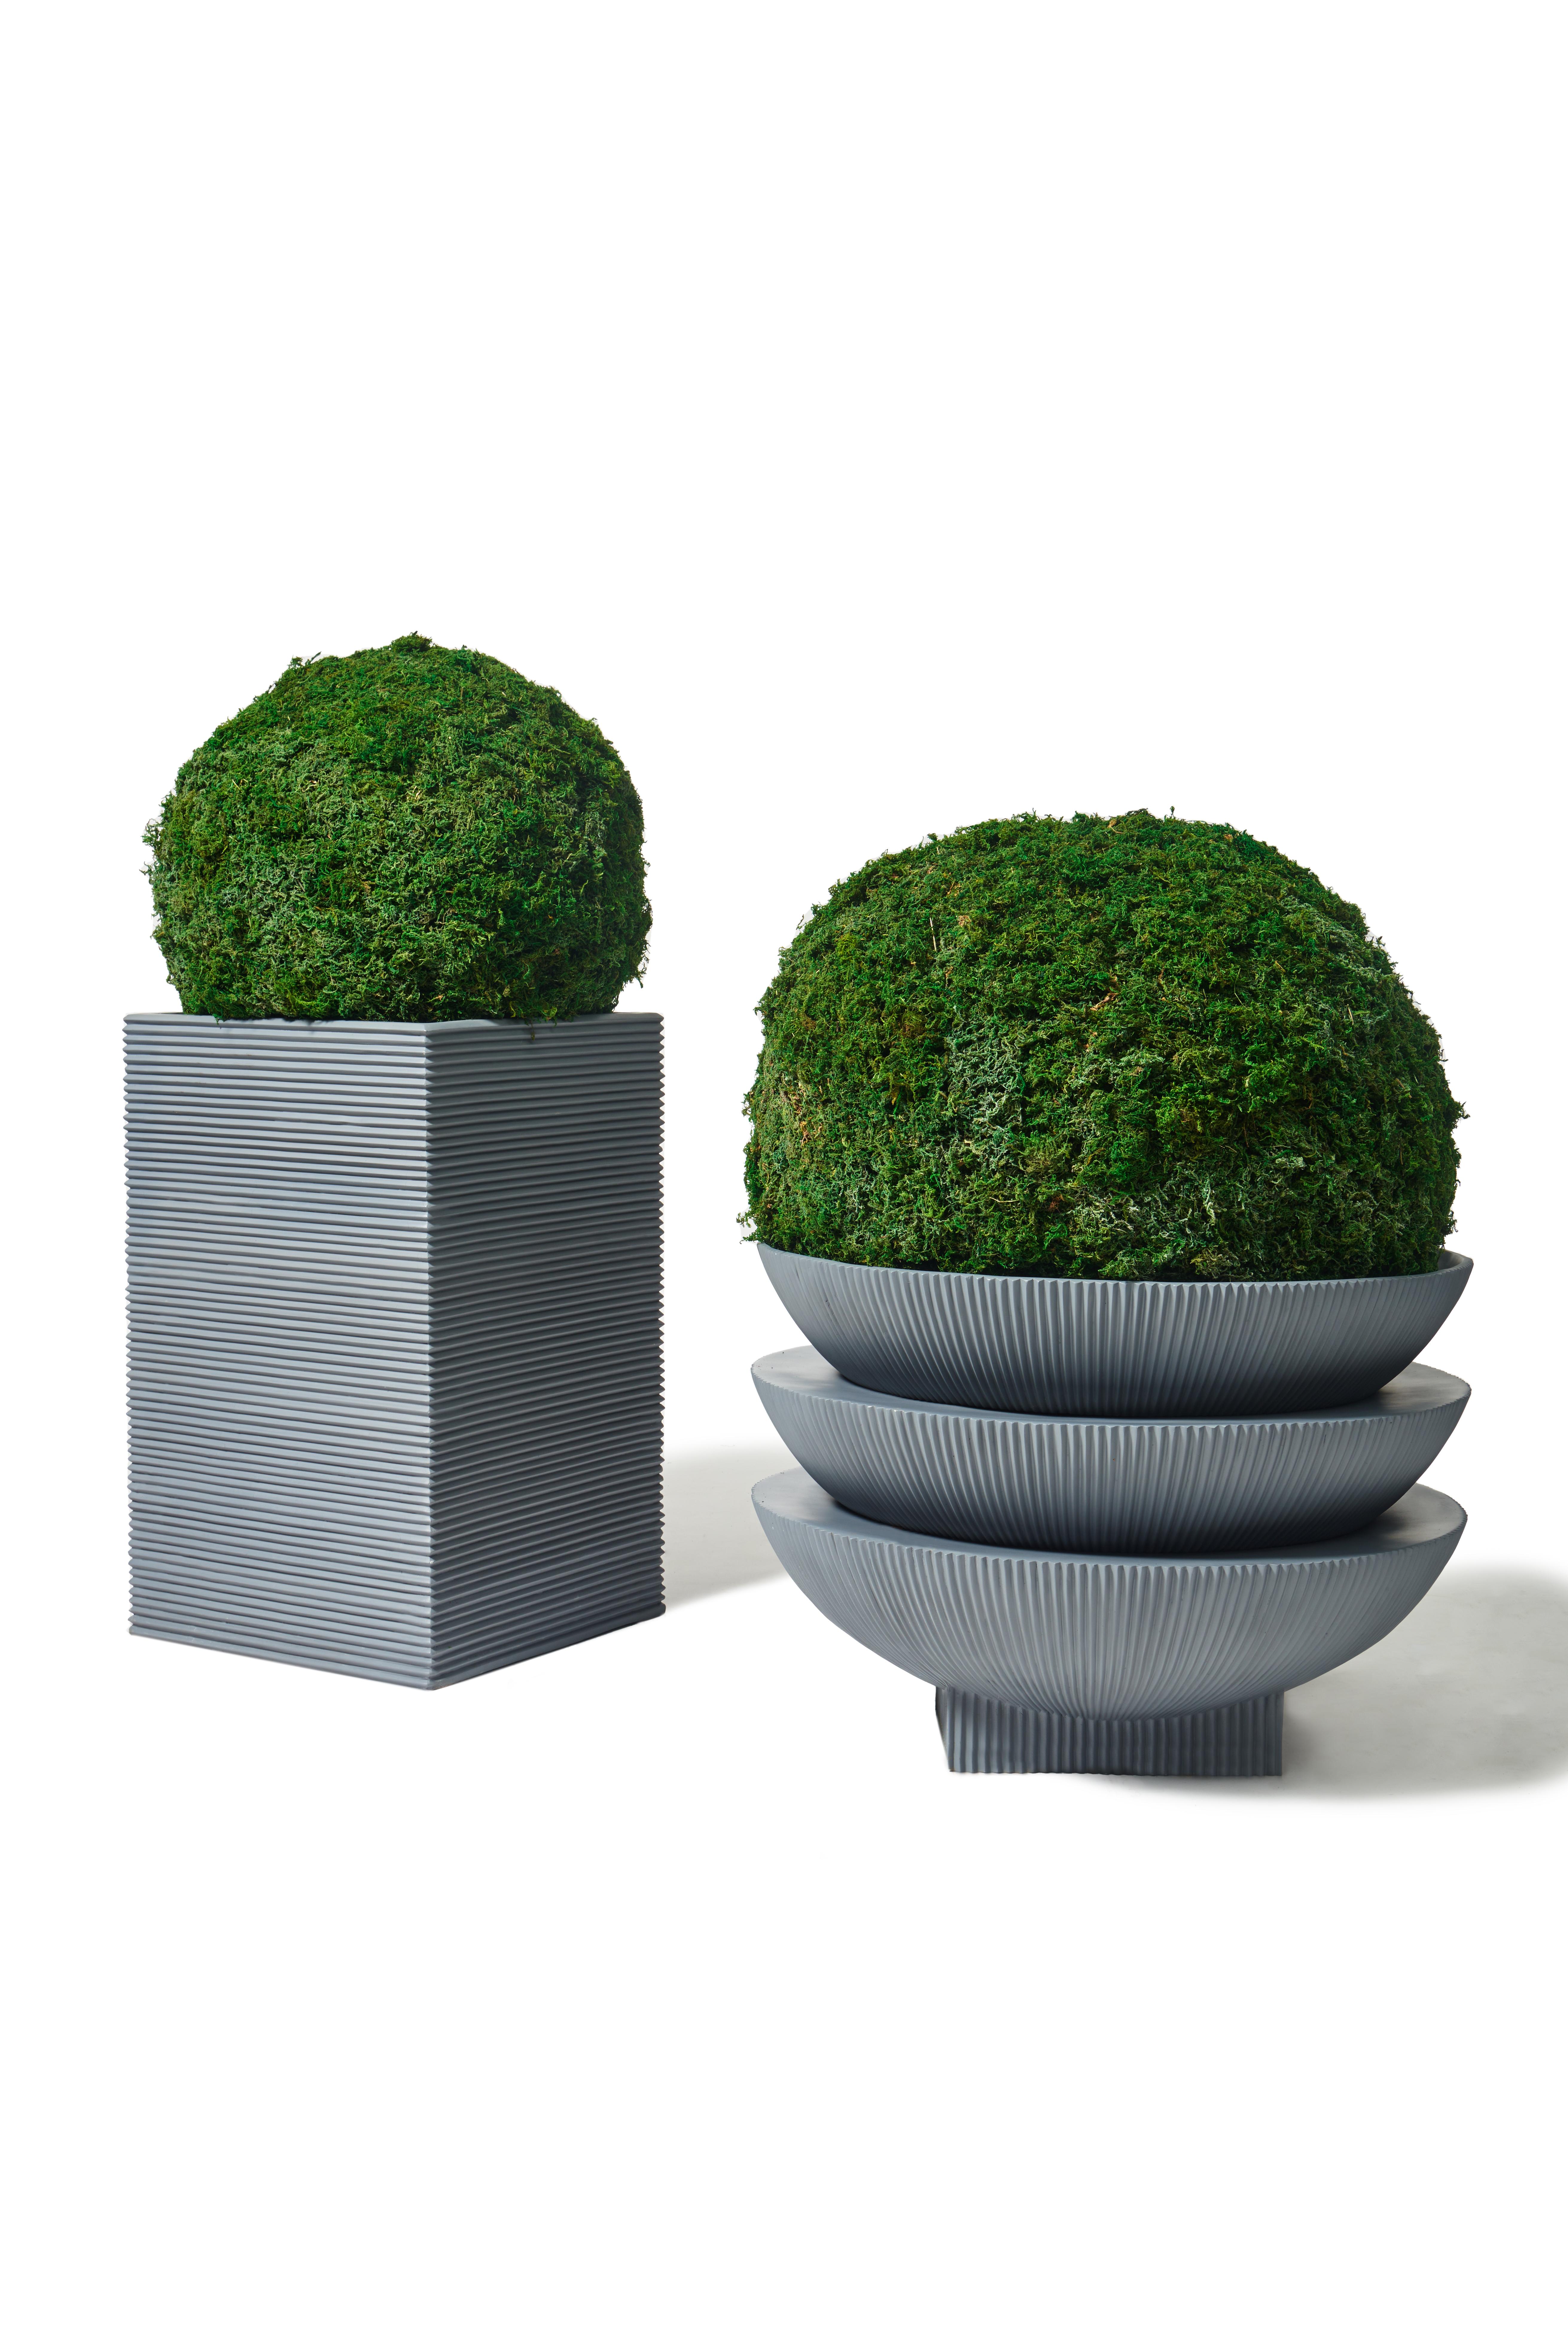 Oversize Half Dome Stack Planter by Tuleste Factory x Manscapers

Fiberglass

Diameter at top: 32